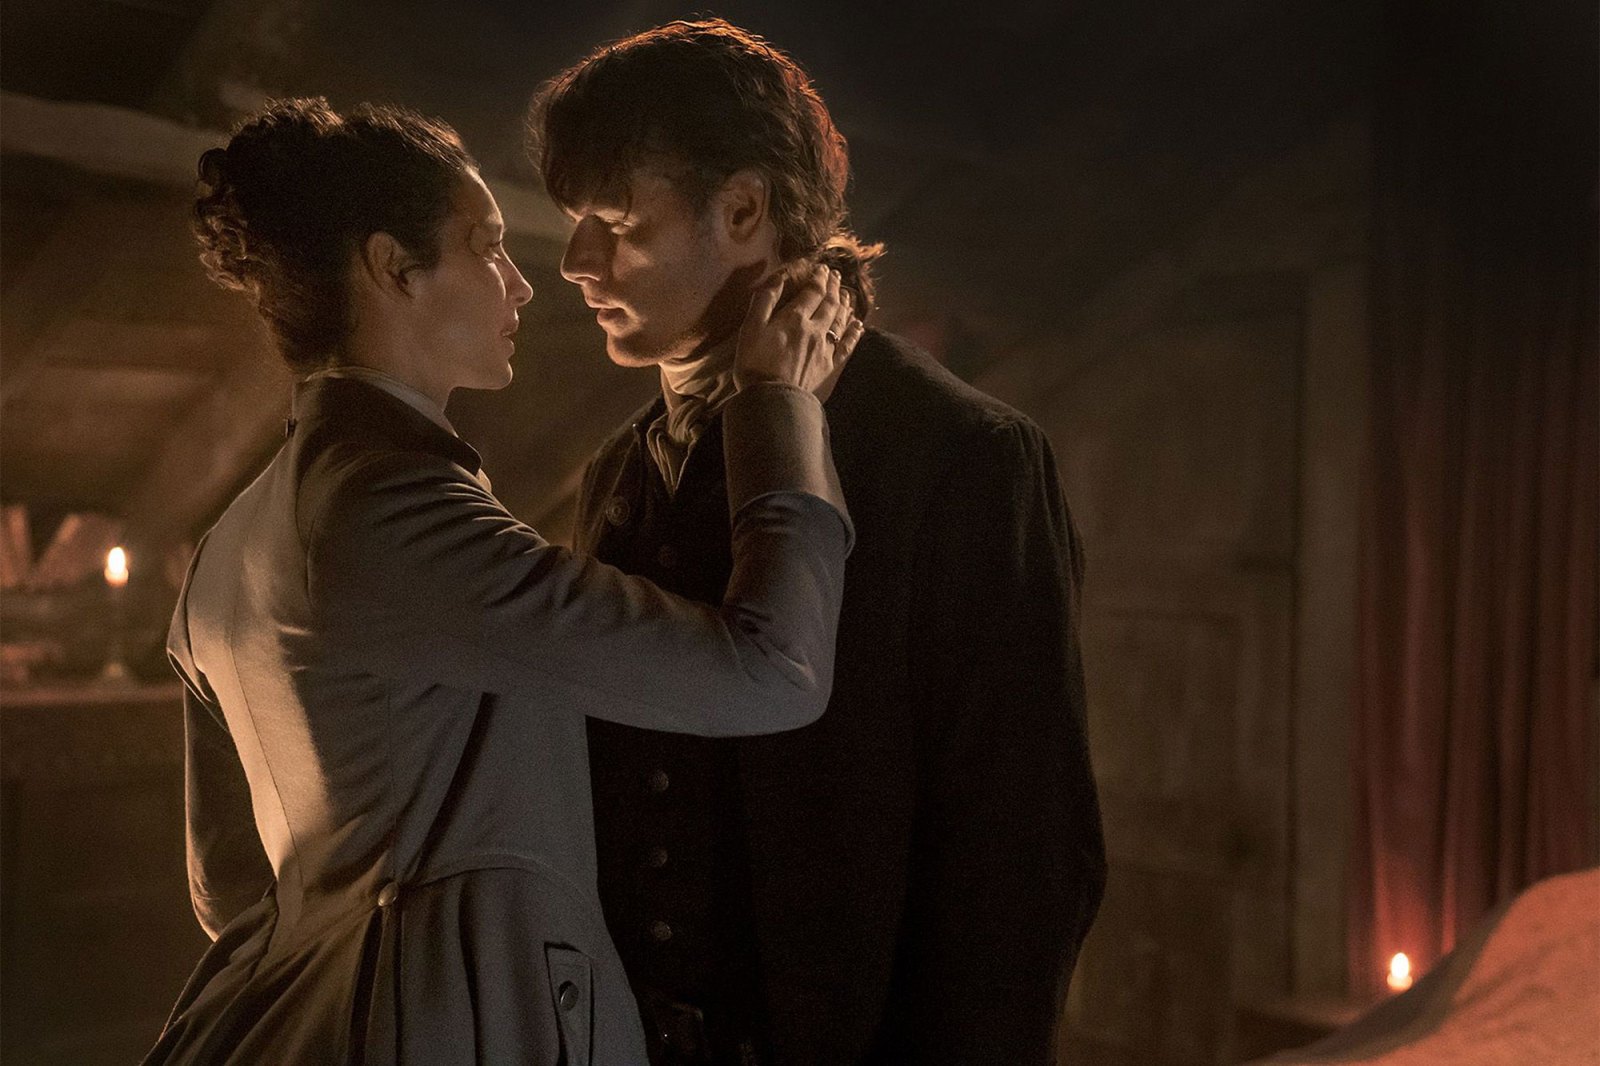 The Outlander Characters Travel Through Time to Different Eras